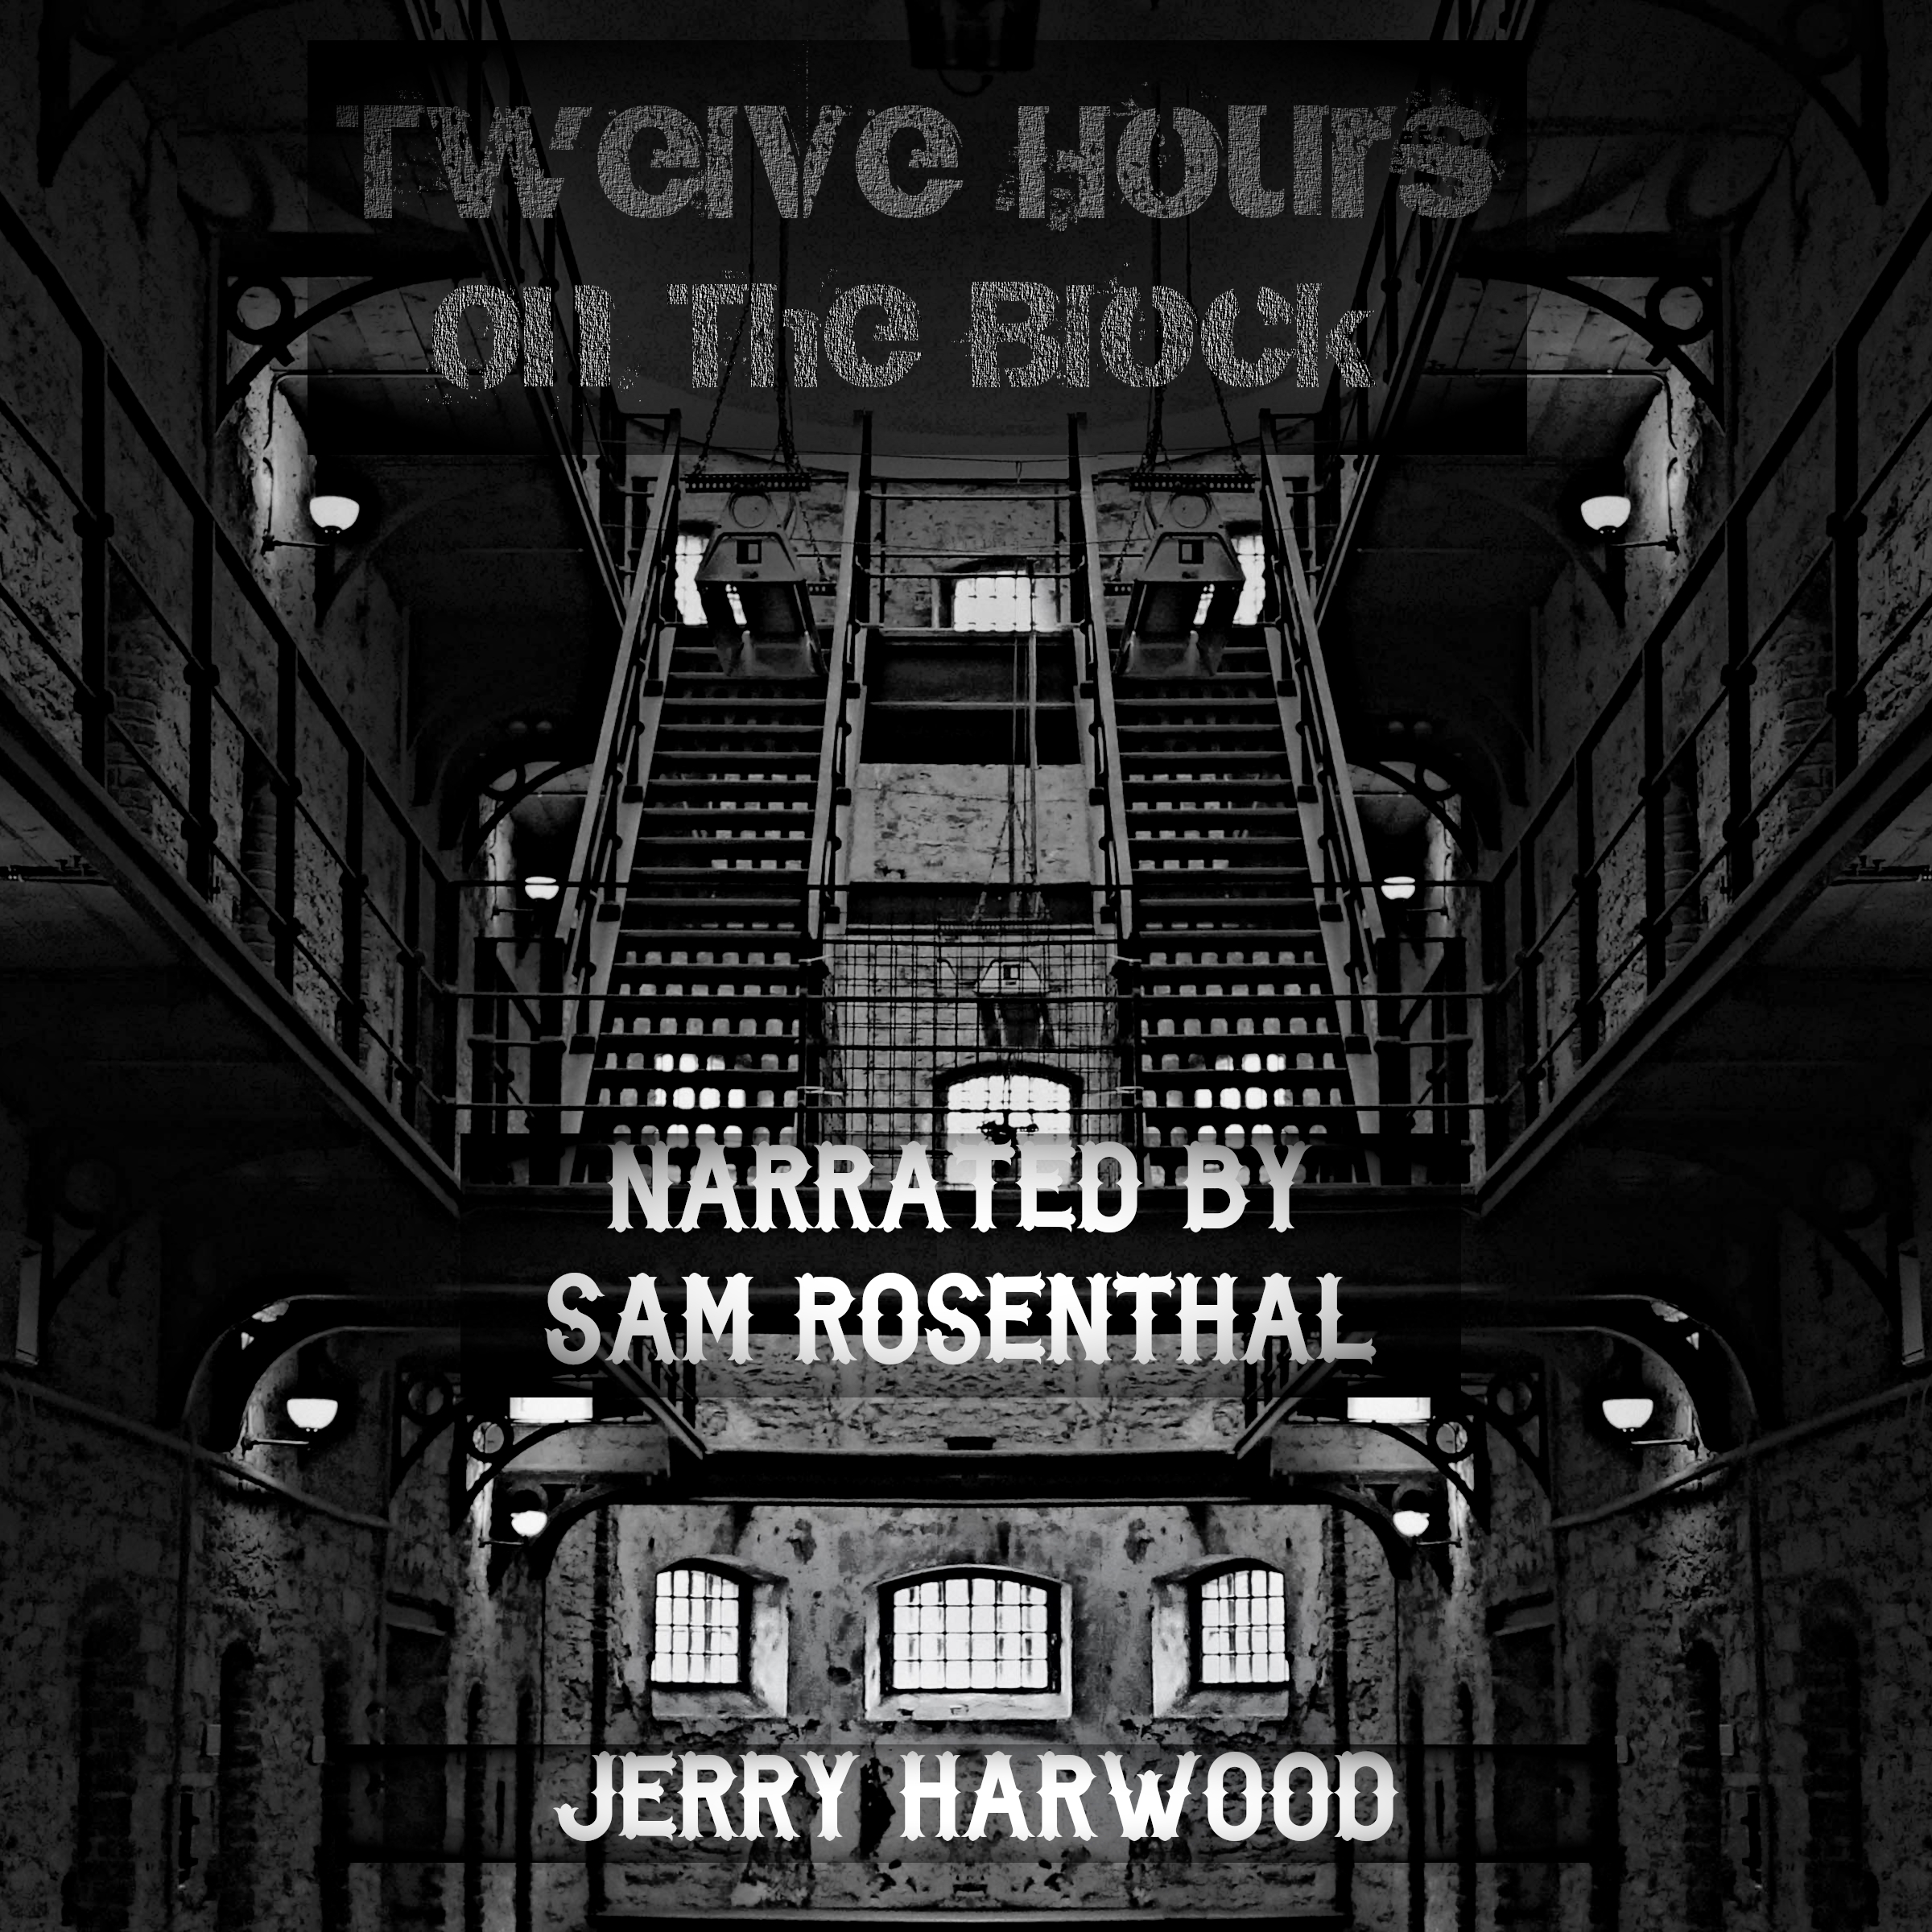 Sam Rosenthal narrates The Aztec creation myth in Twelve Hours On The Block by Jerry Harwood, now available on Audible!